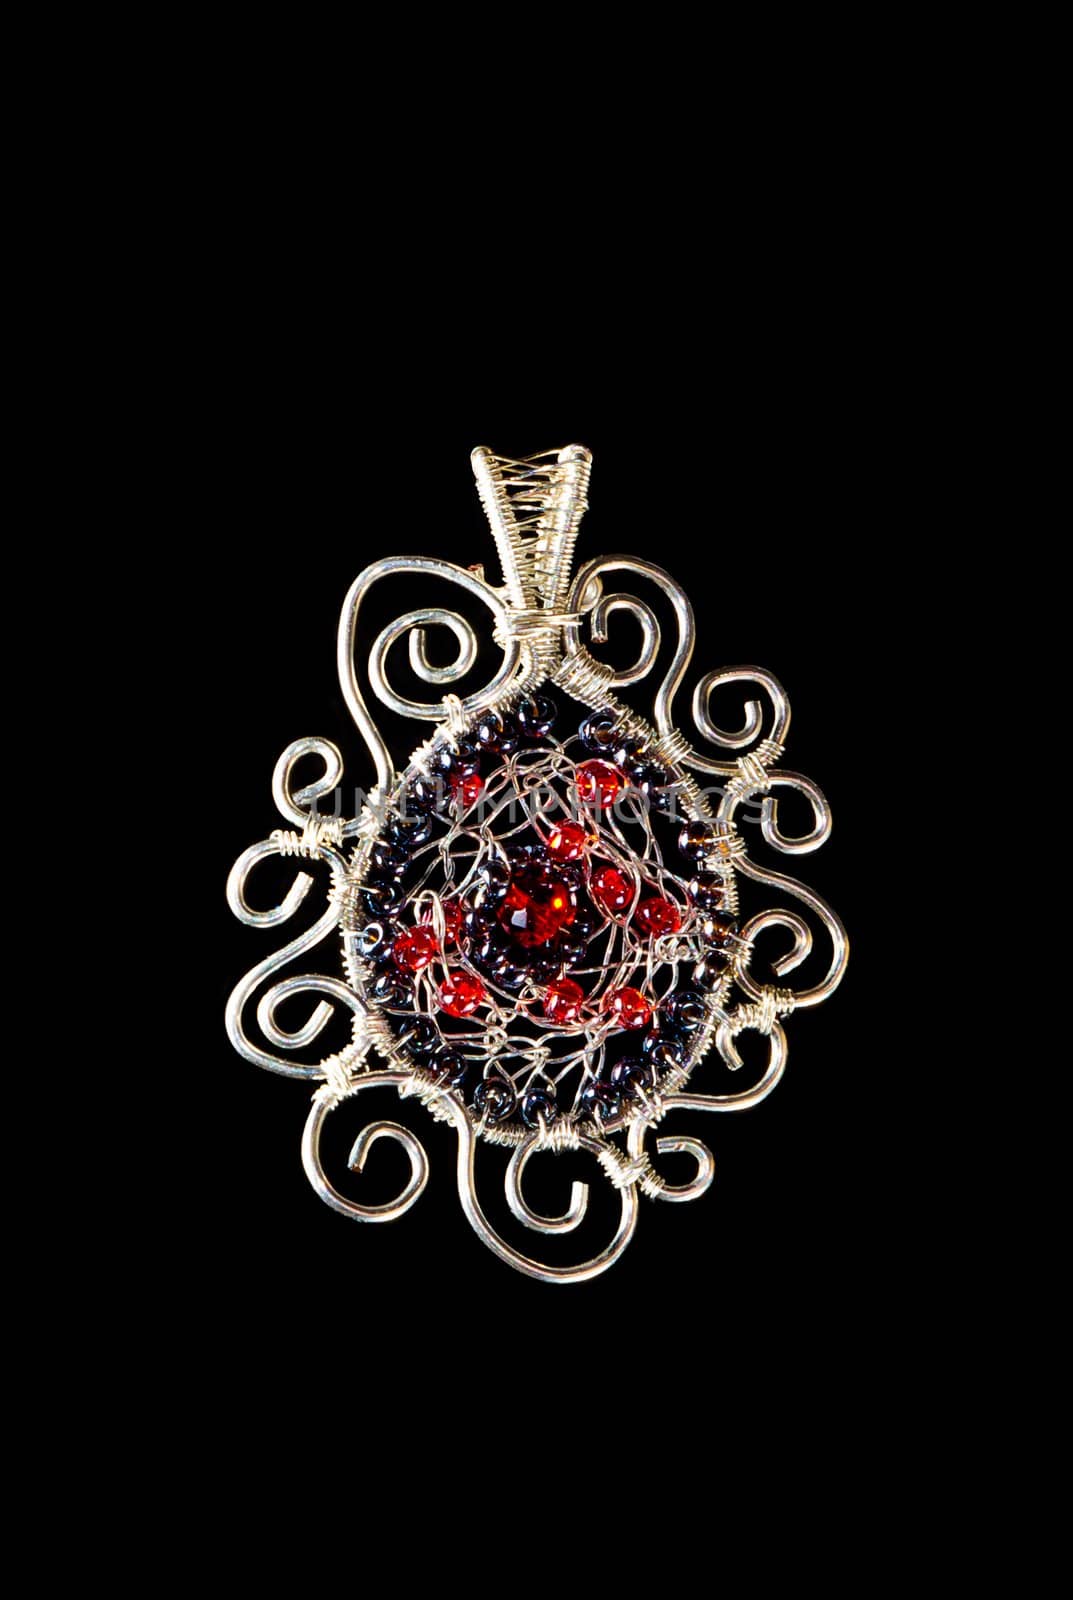 Unique handmade wire-work pendant with red and silver beads